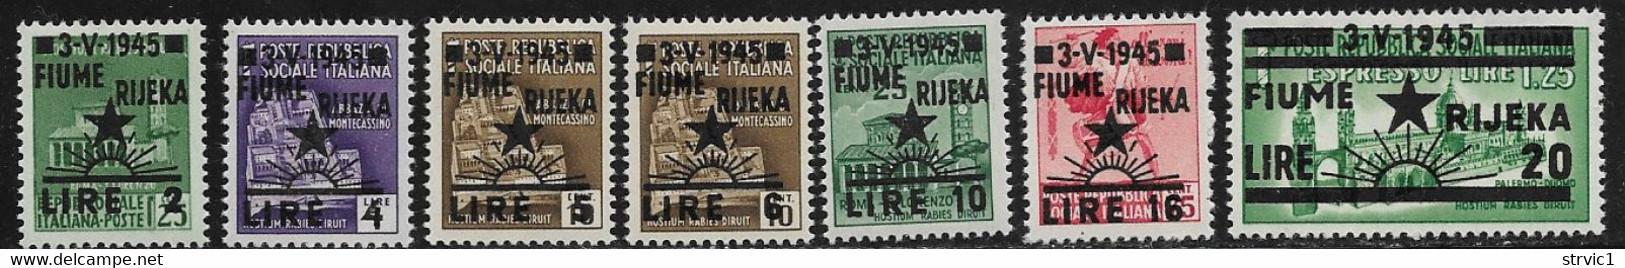 Italian Occupation Trieste B Fiume, Michel # 27-33 Mint Hinged Italy Social Rep. Stamps Surcharged, 1945 - Occup. Iugoslava: Fiume